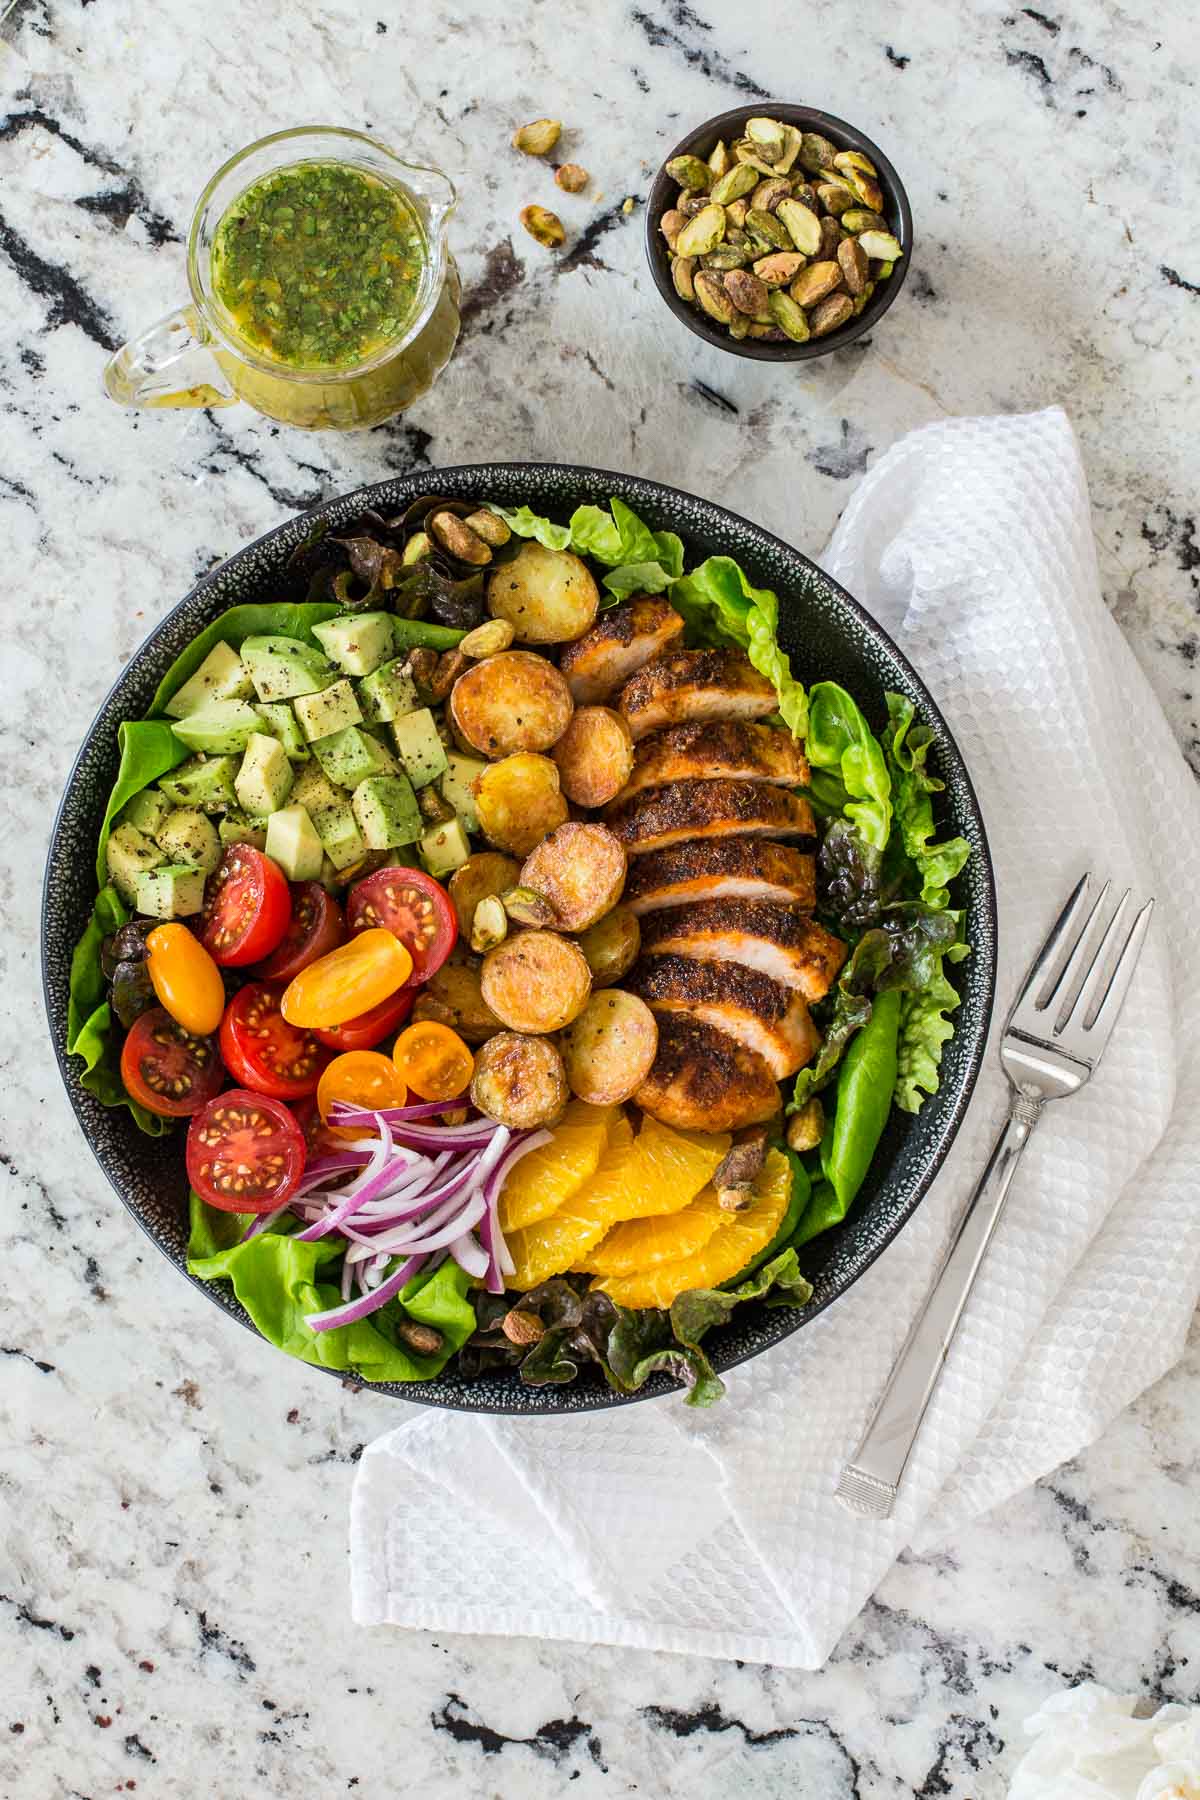 Vertical overhead photo of a serving bowl of Warm Chicken and Roasted Potato Salad on a granite kitchen countertop.